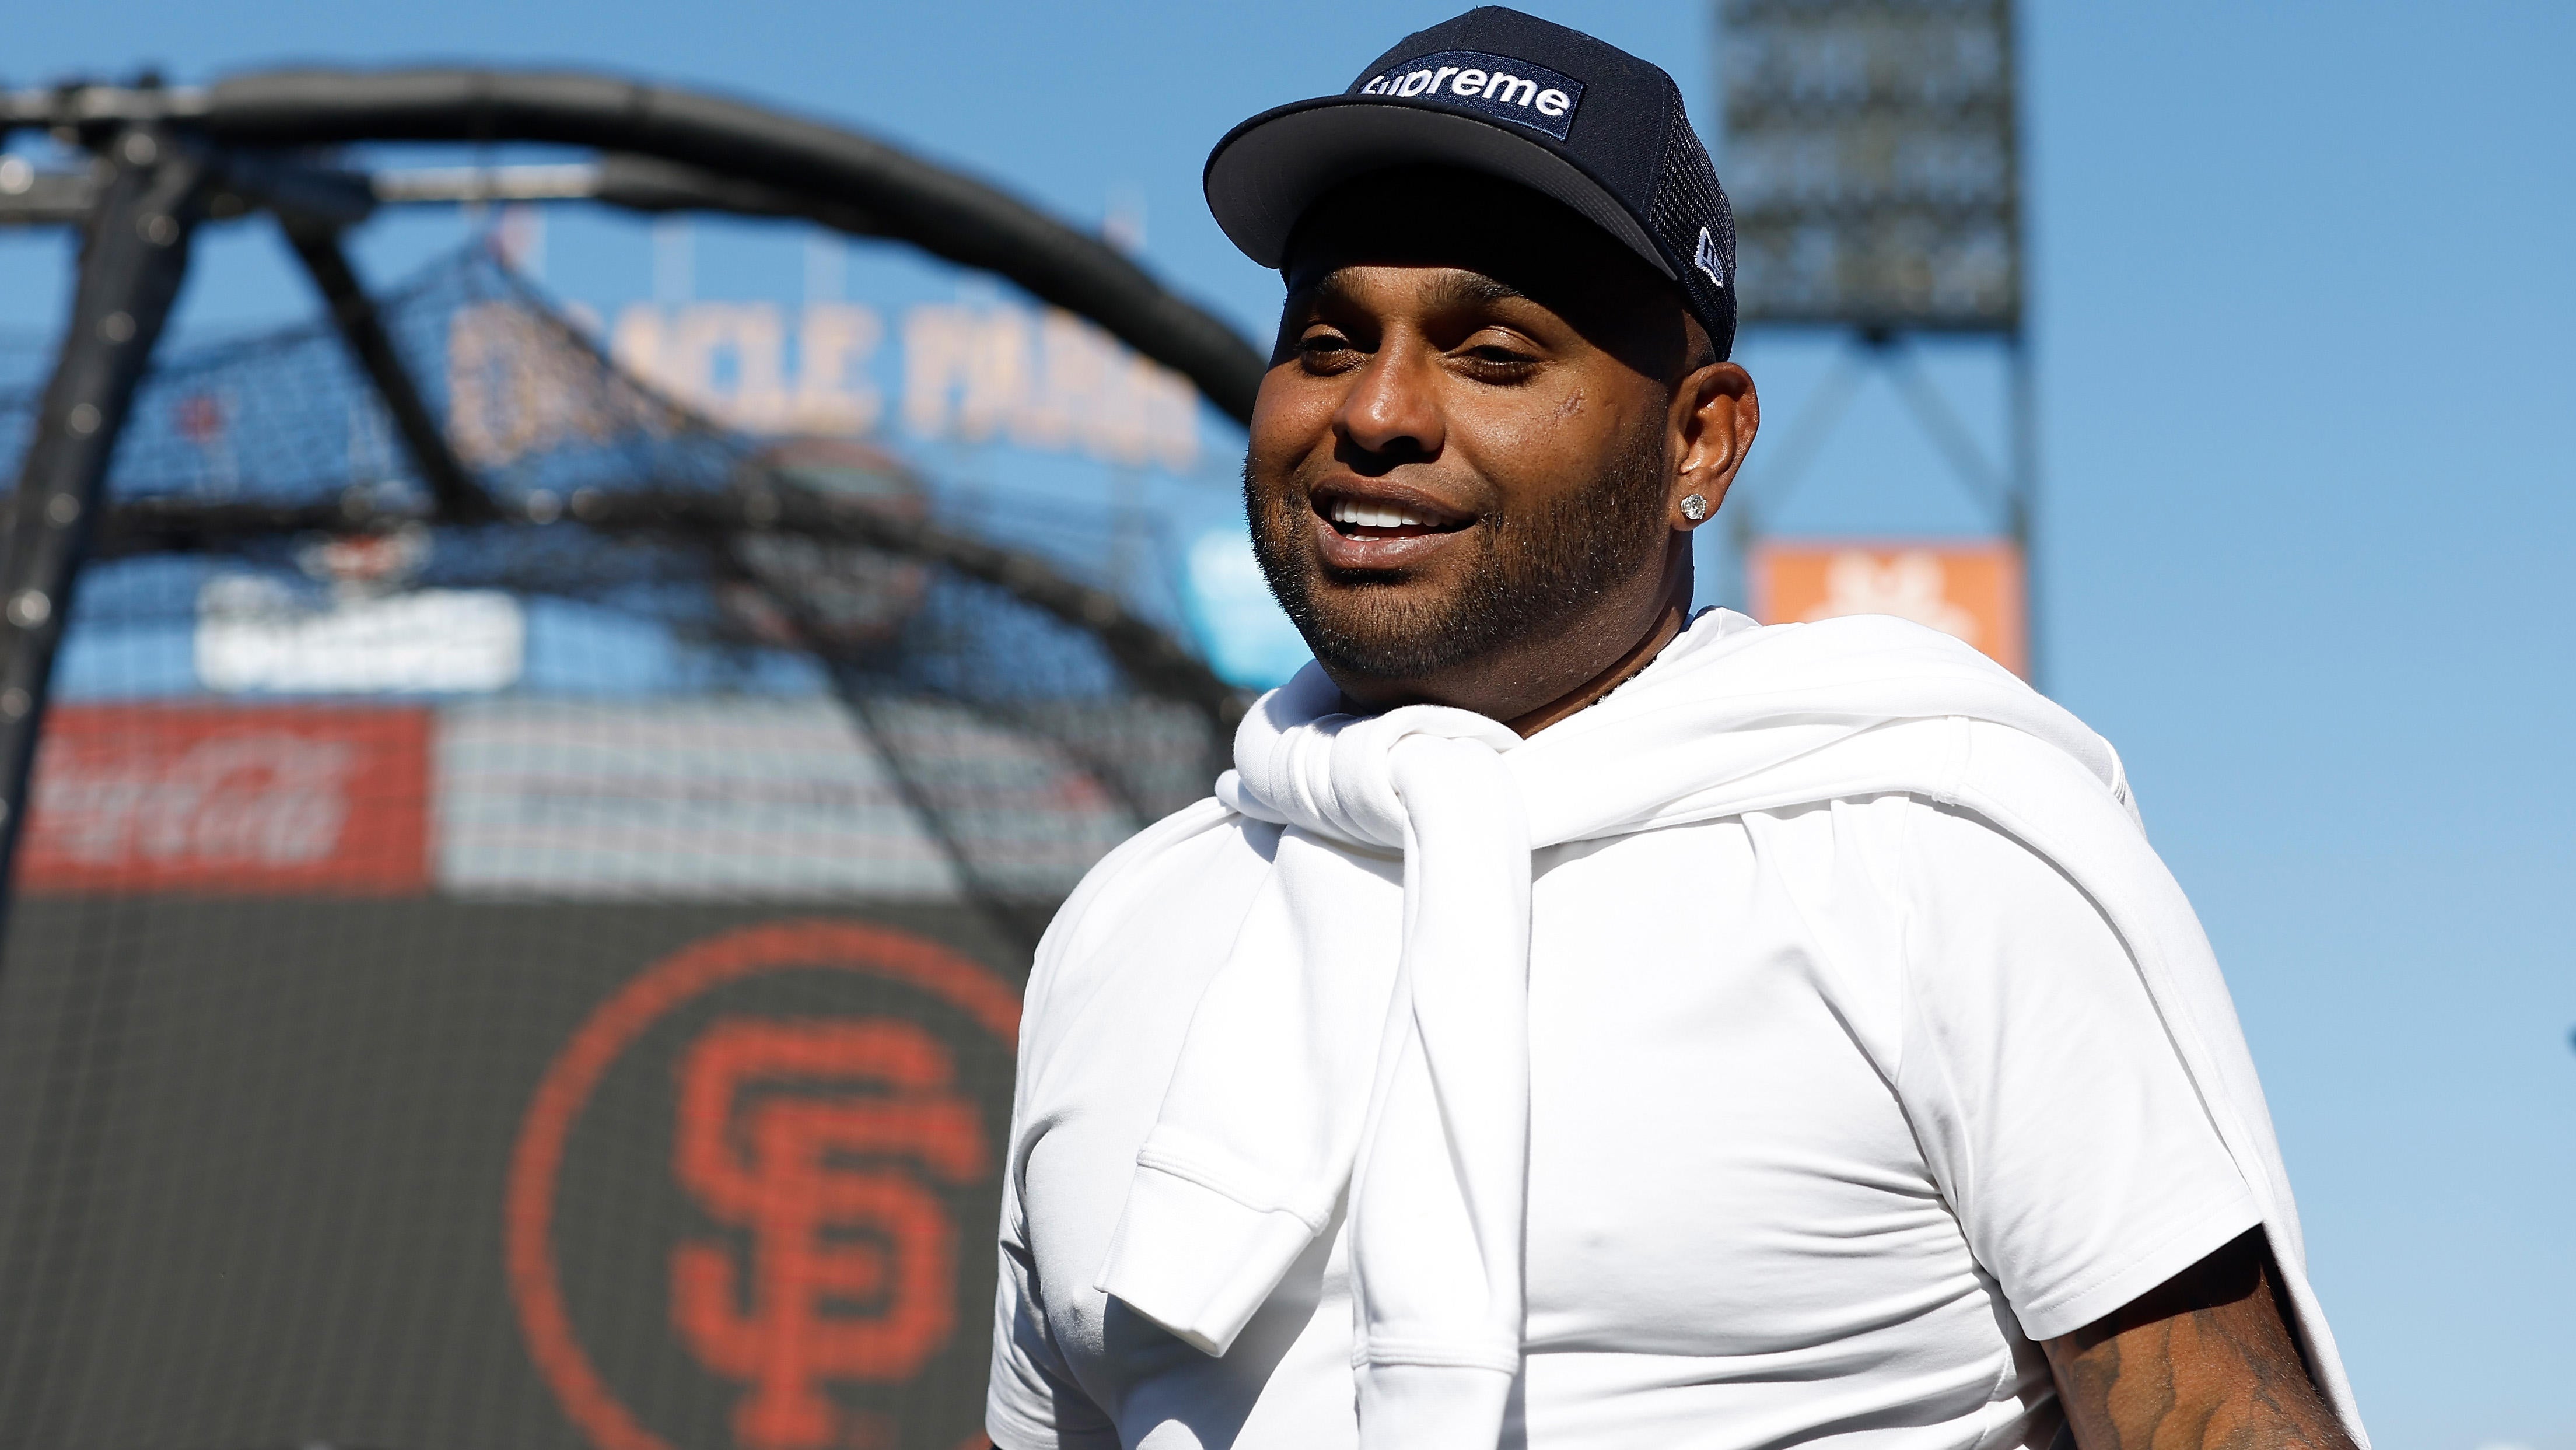 Pablo Sandoval attempting comeback as 37-year-old fan favorite in Giants spring training, per report